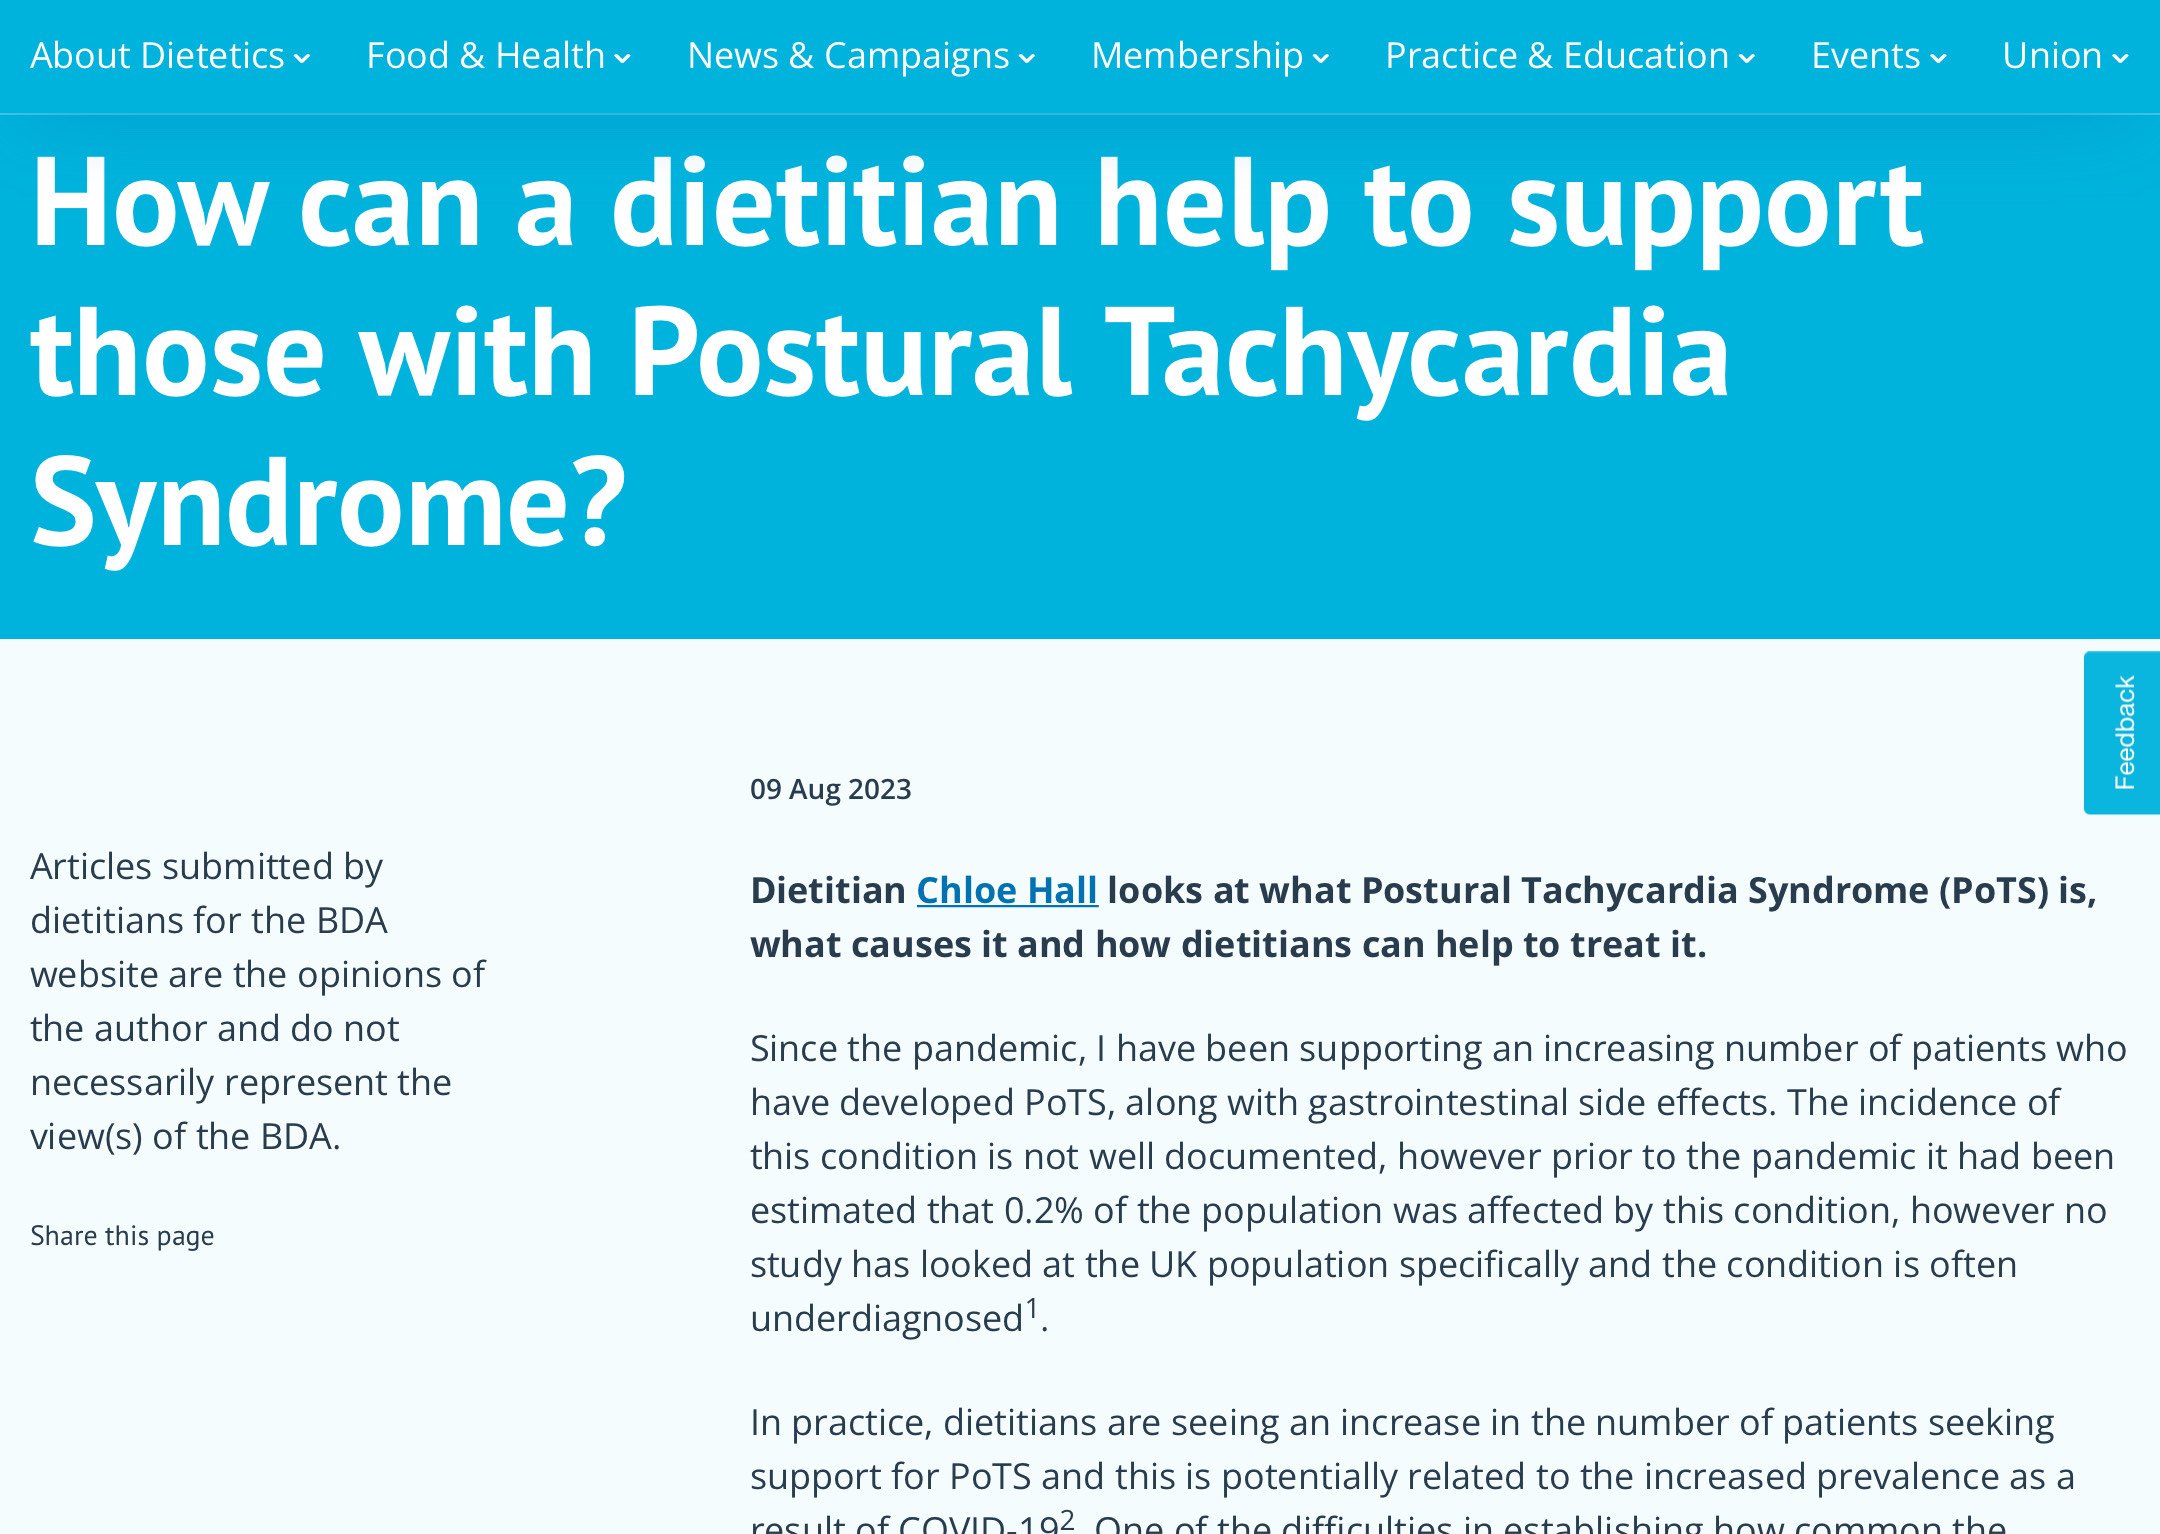 POSTURAL TACHYCARDIA SYNDROME (POTS) – HERE'S WHAT YOU NEED TO